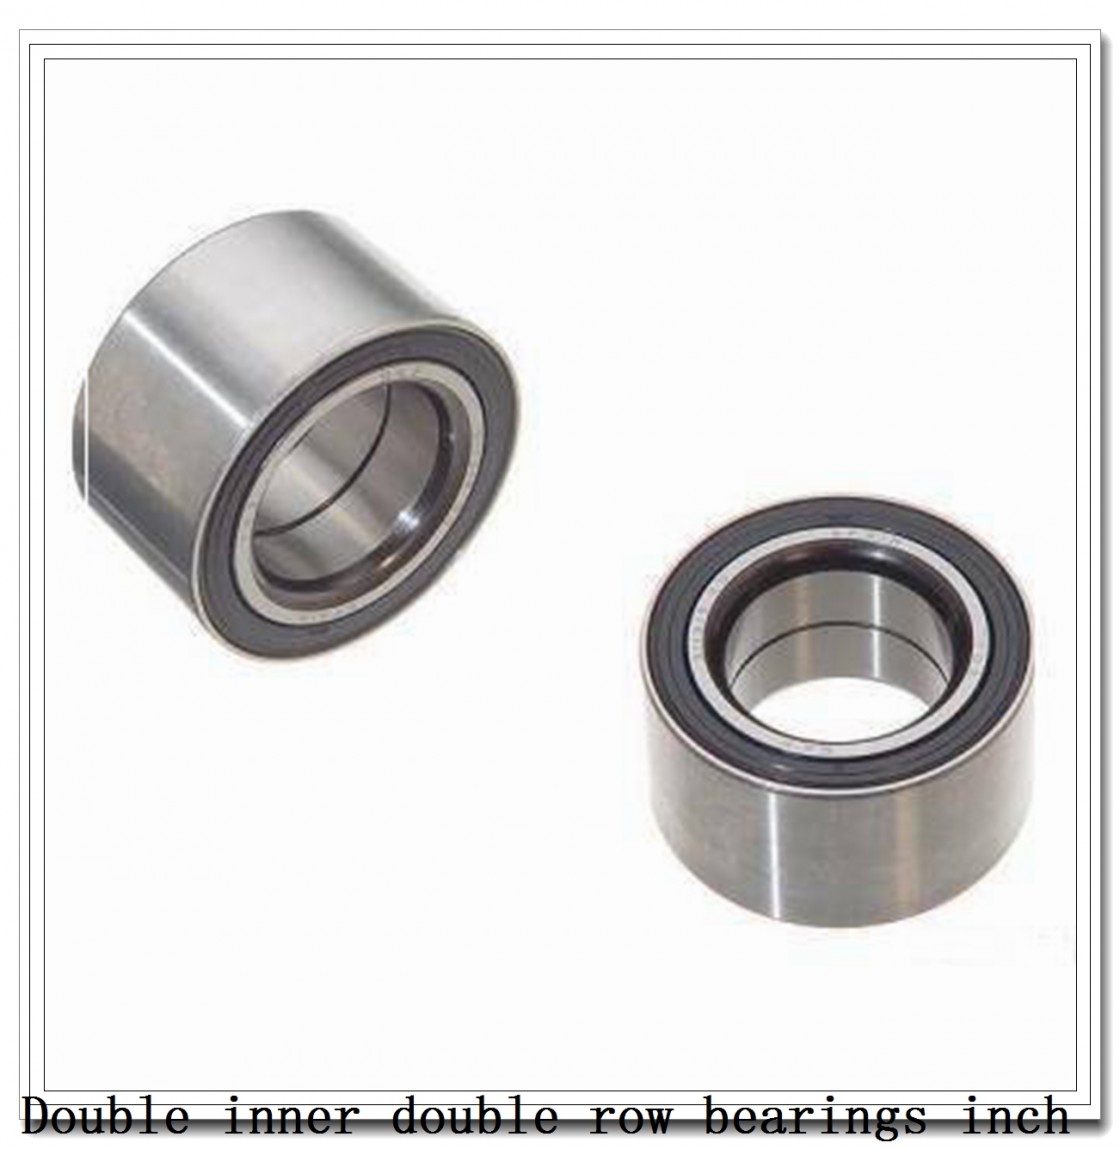 LM377449/LM377410D Double inner double row bearings inch